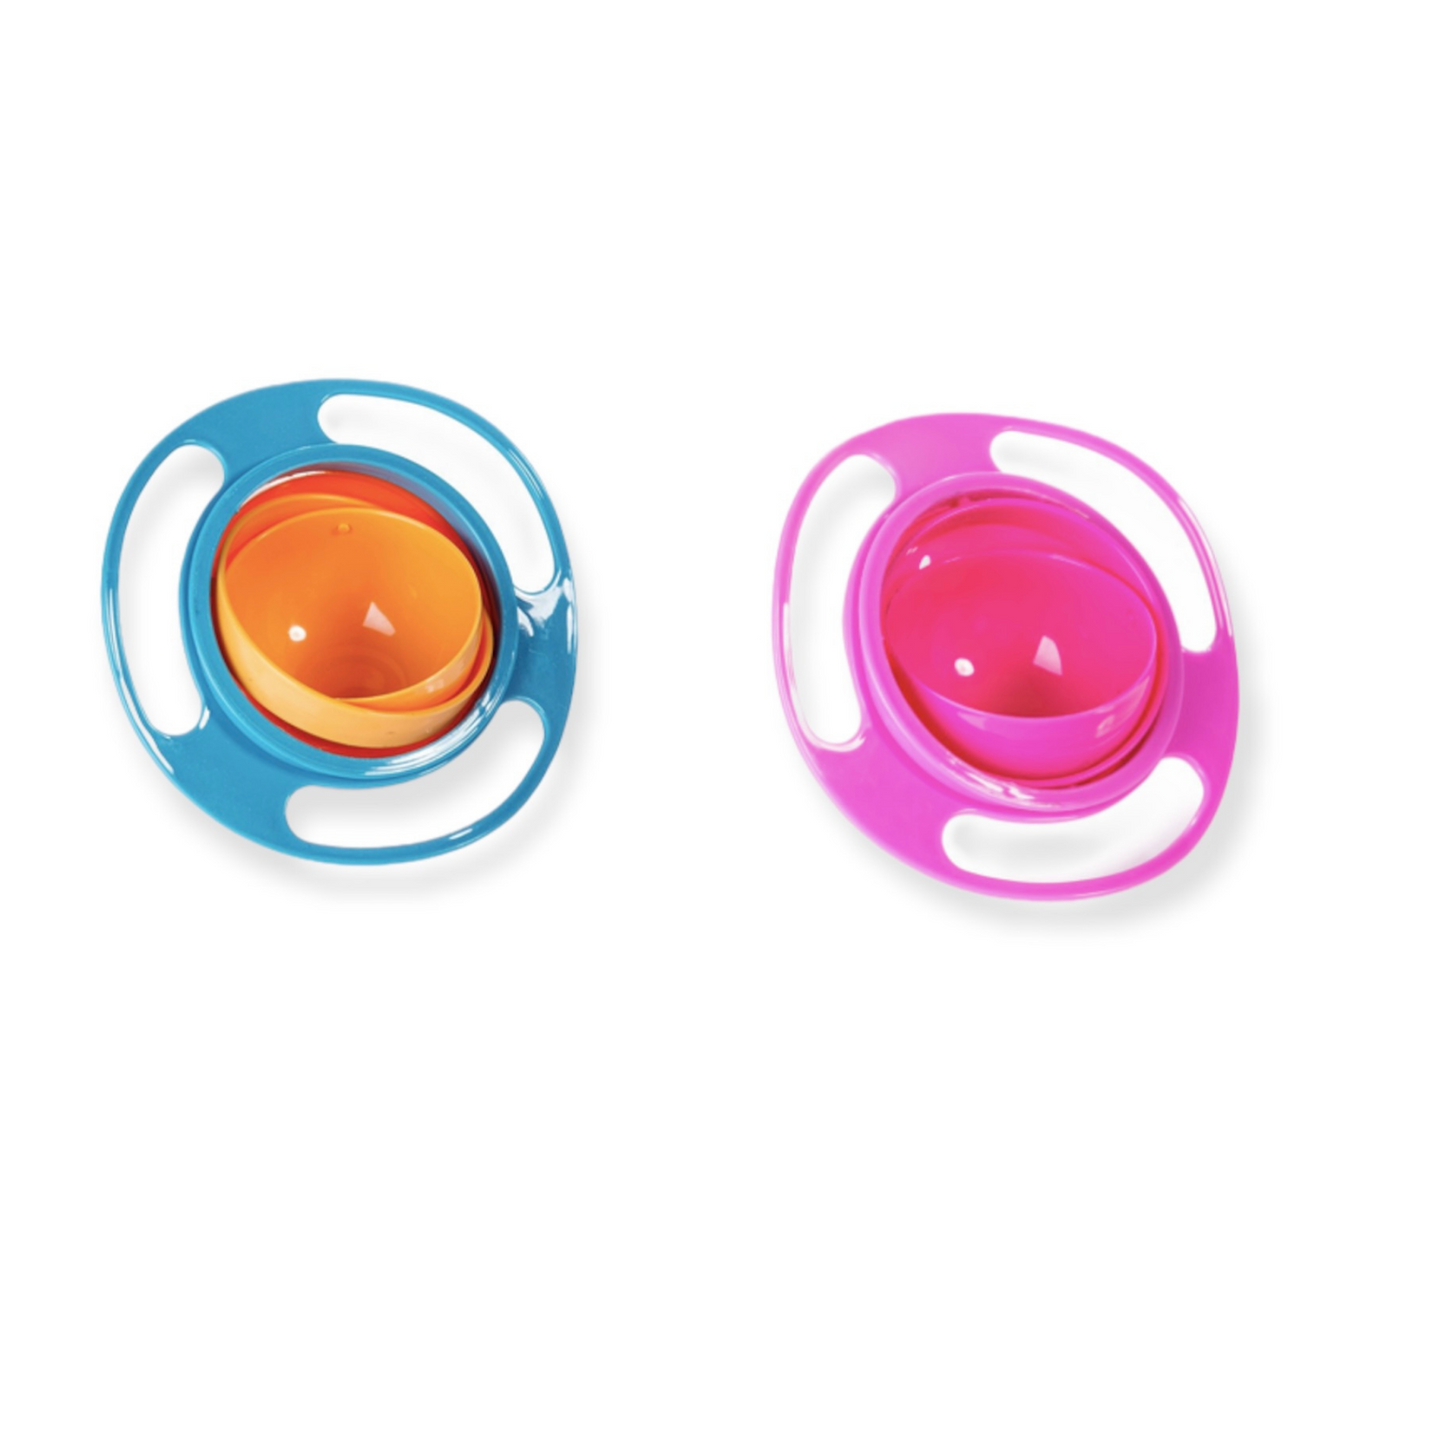 Set of spill proof 360 degree gyro bowl blue and pink for baby - hunny bubba kids